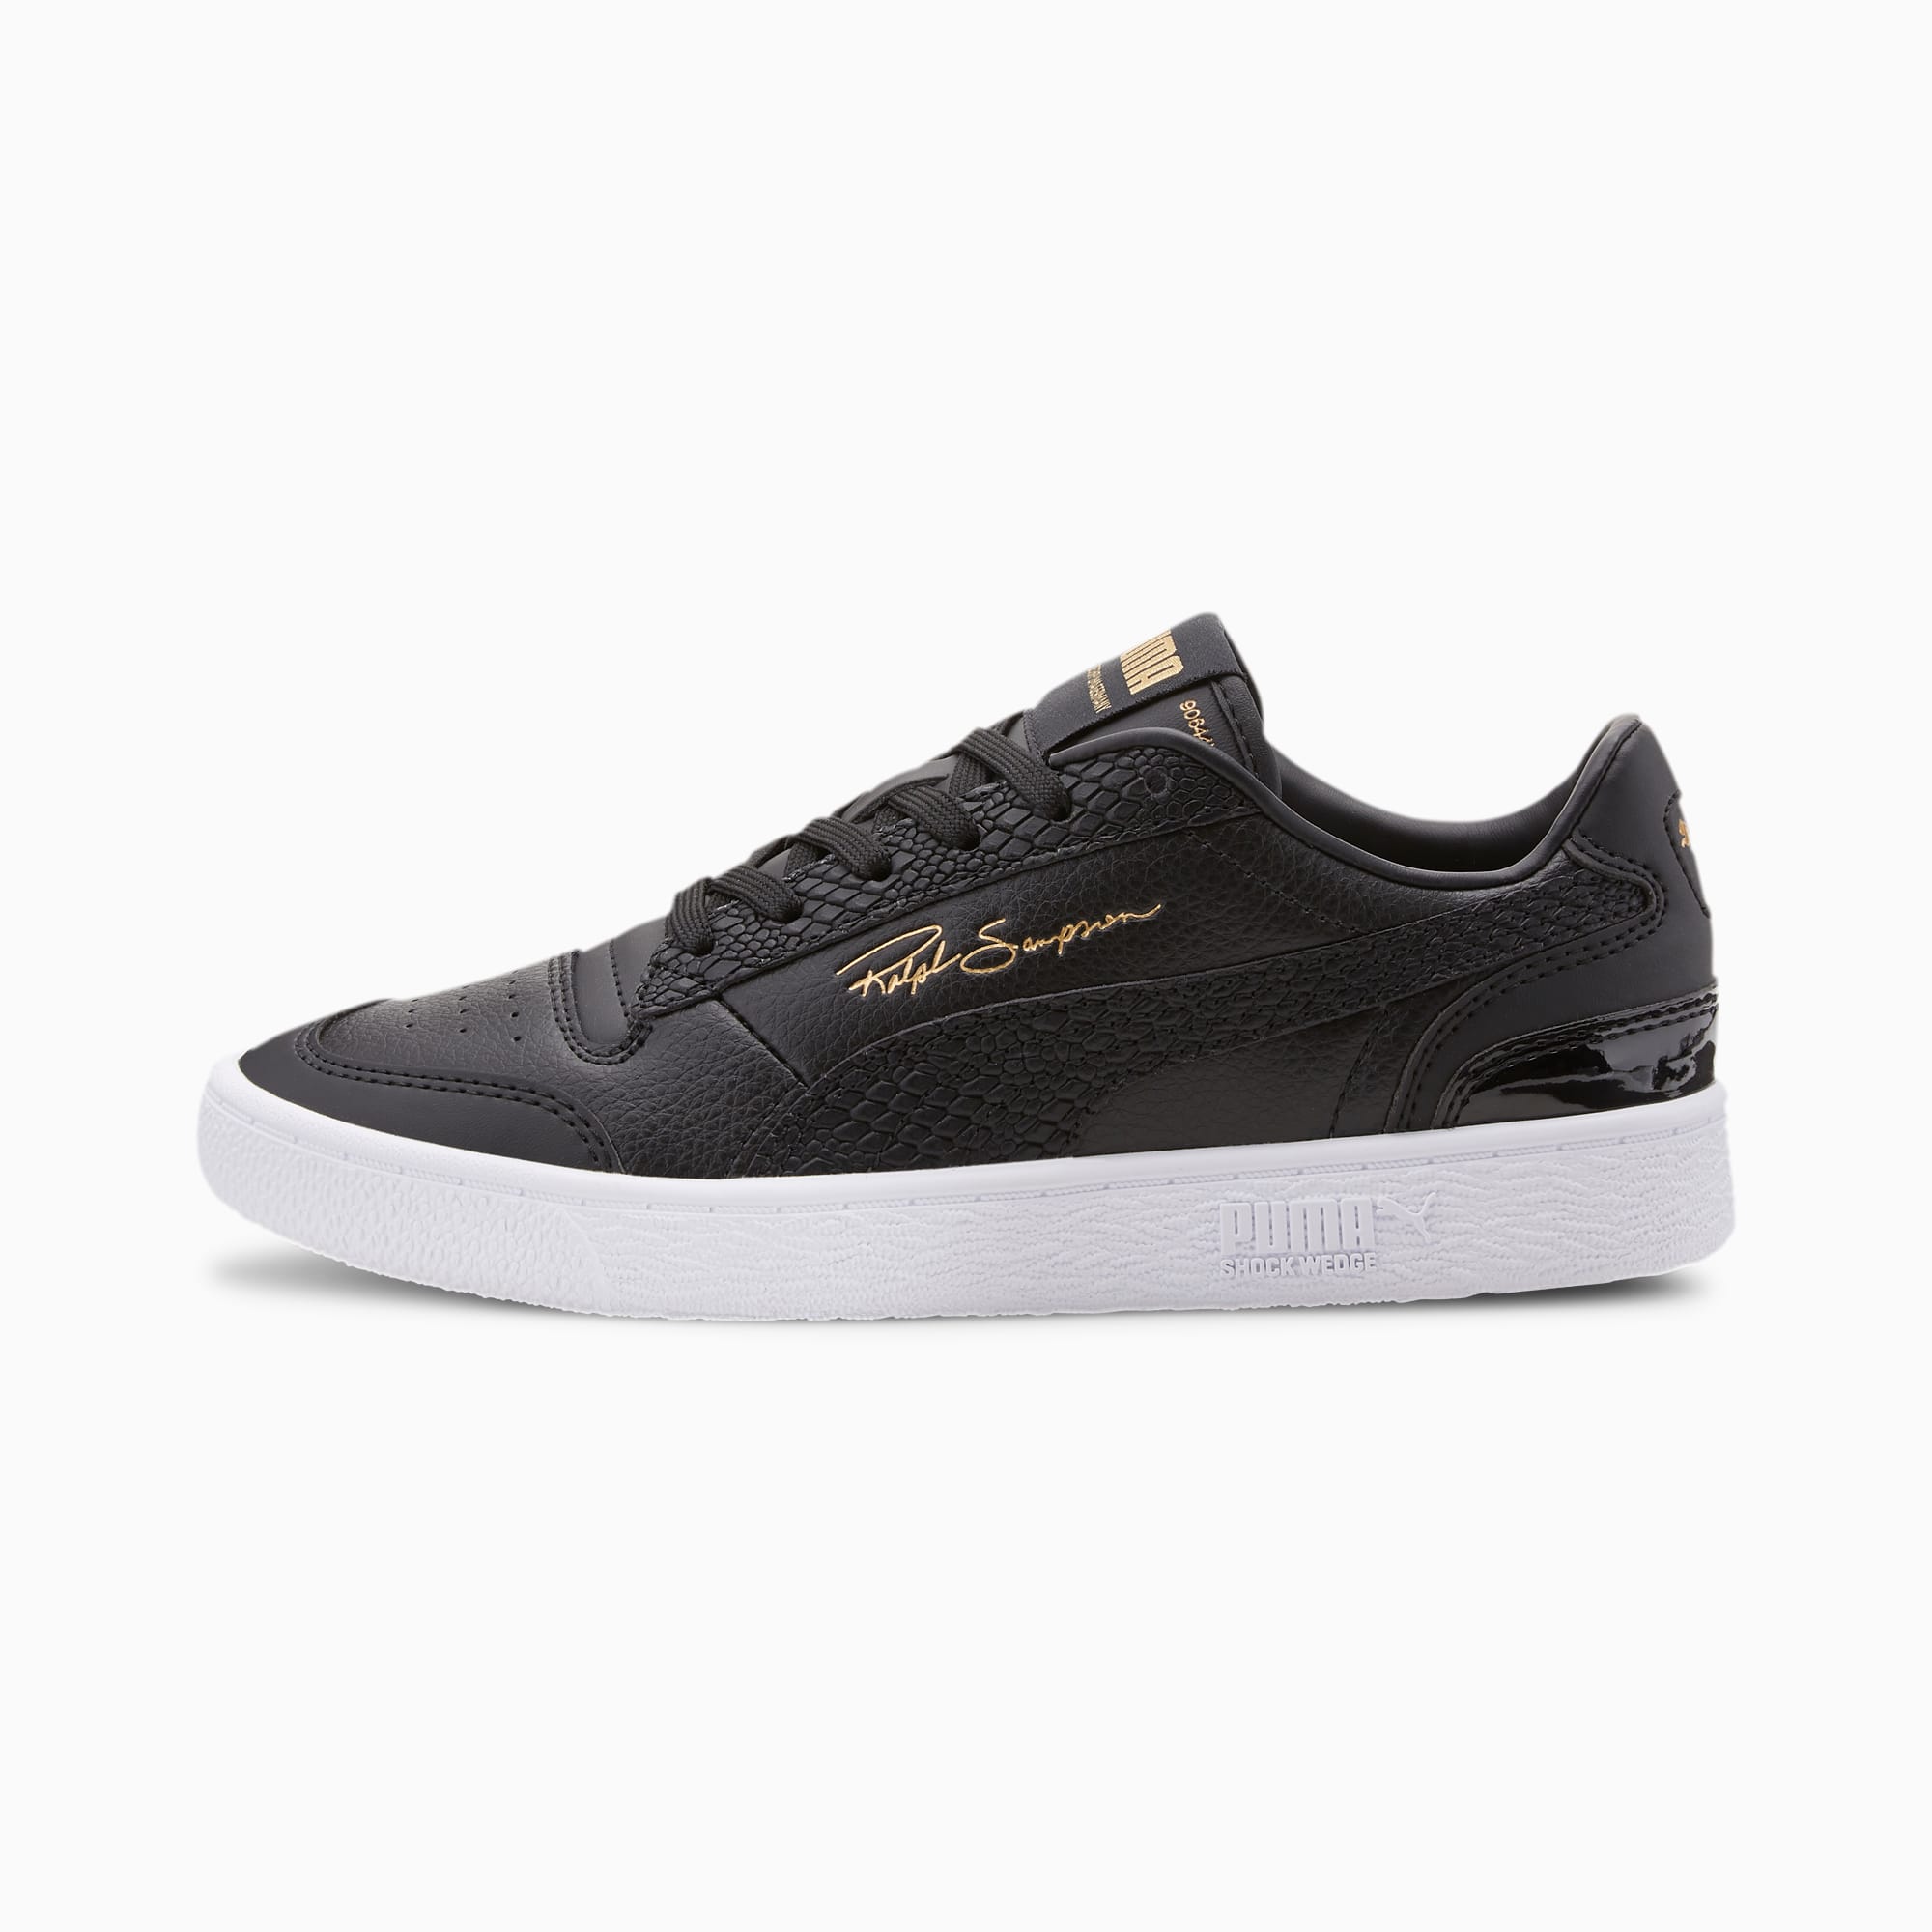 puma wedge sneakers black and gold